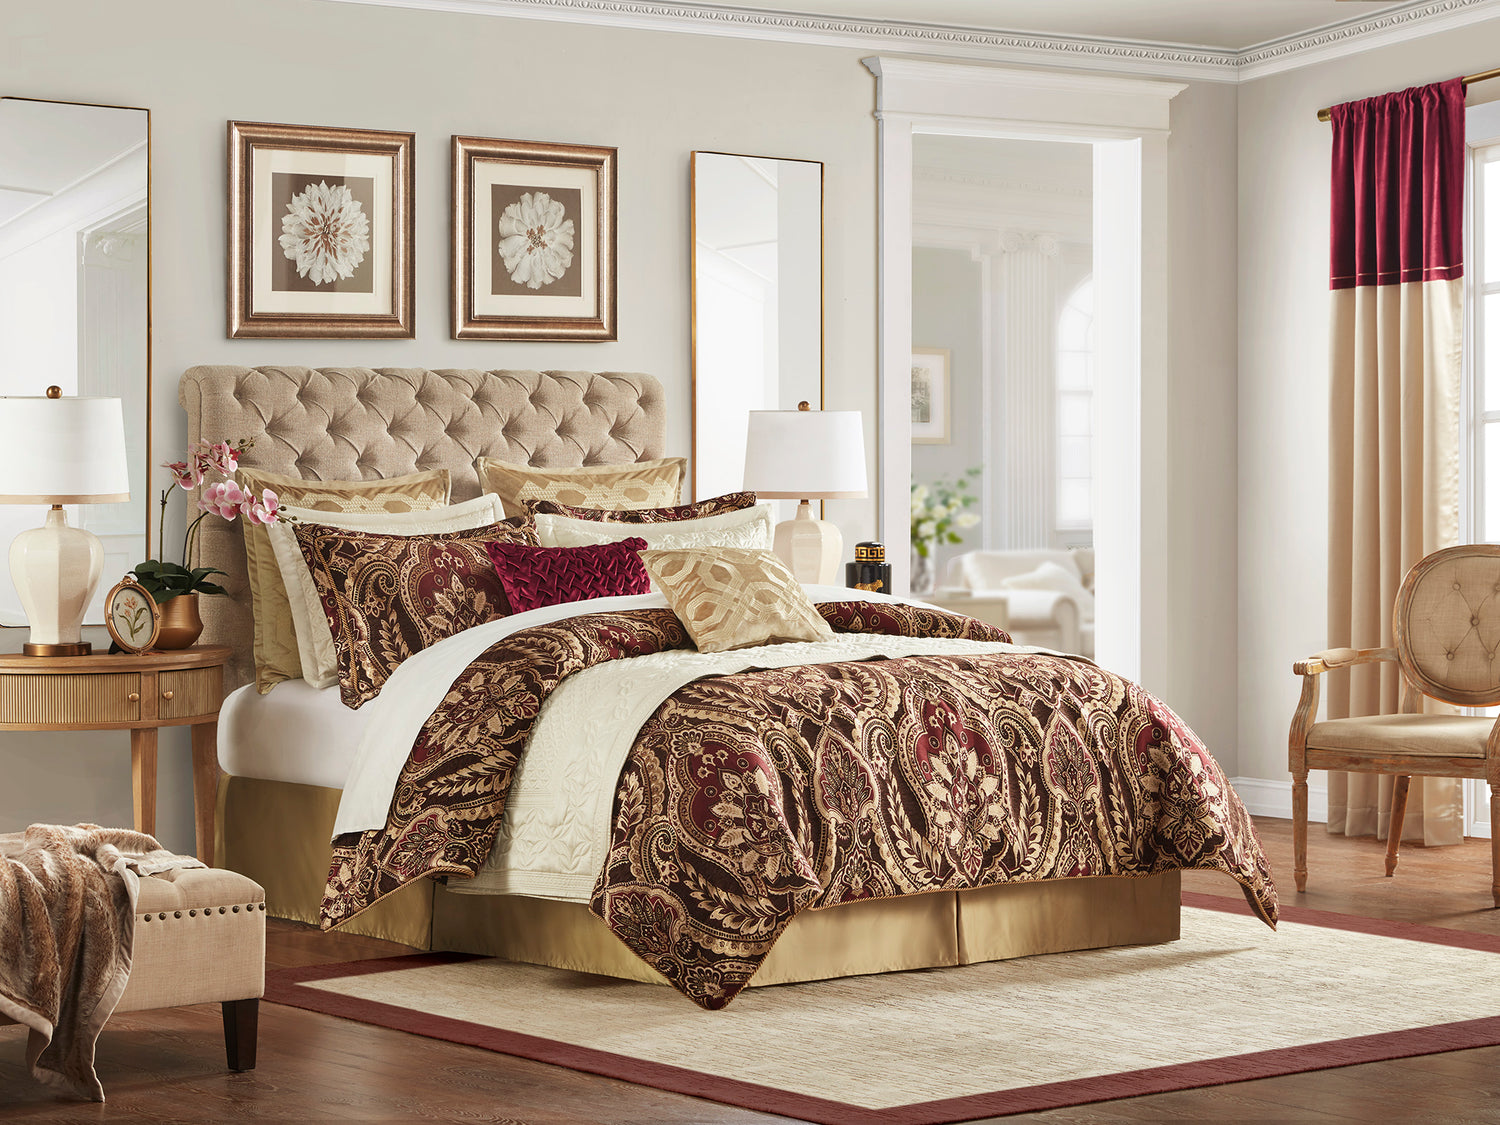 Croscill Classics Collections - Julius Comforter Set with Versailles Quilt Set, Montague Euro Shams, Winchester Square Decor Pillows, Aumont Oblong Decor Pillows, and Vicenza Invertible Window Panels